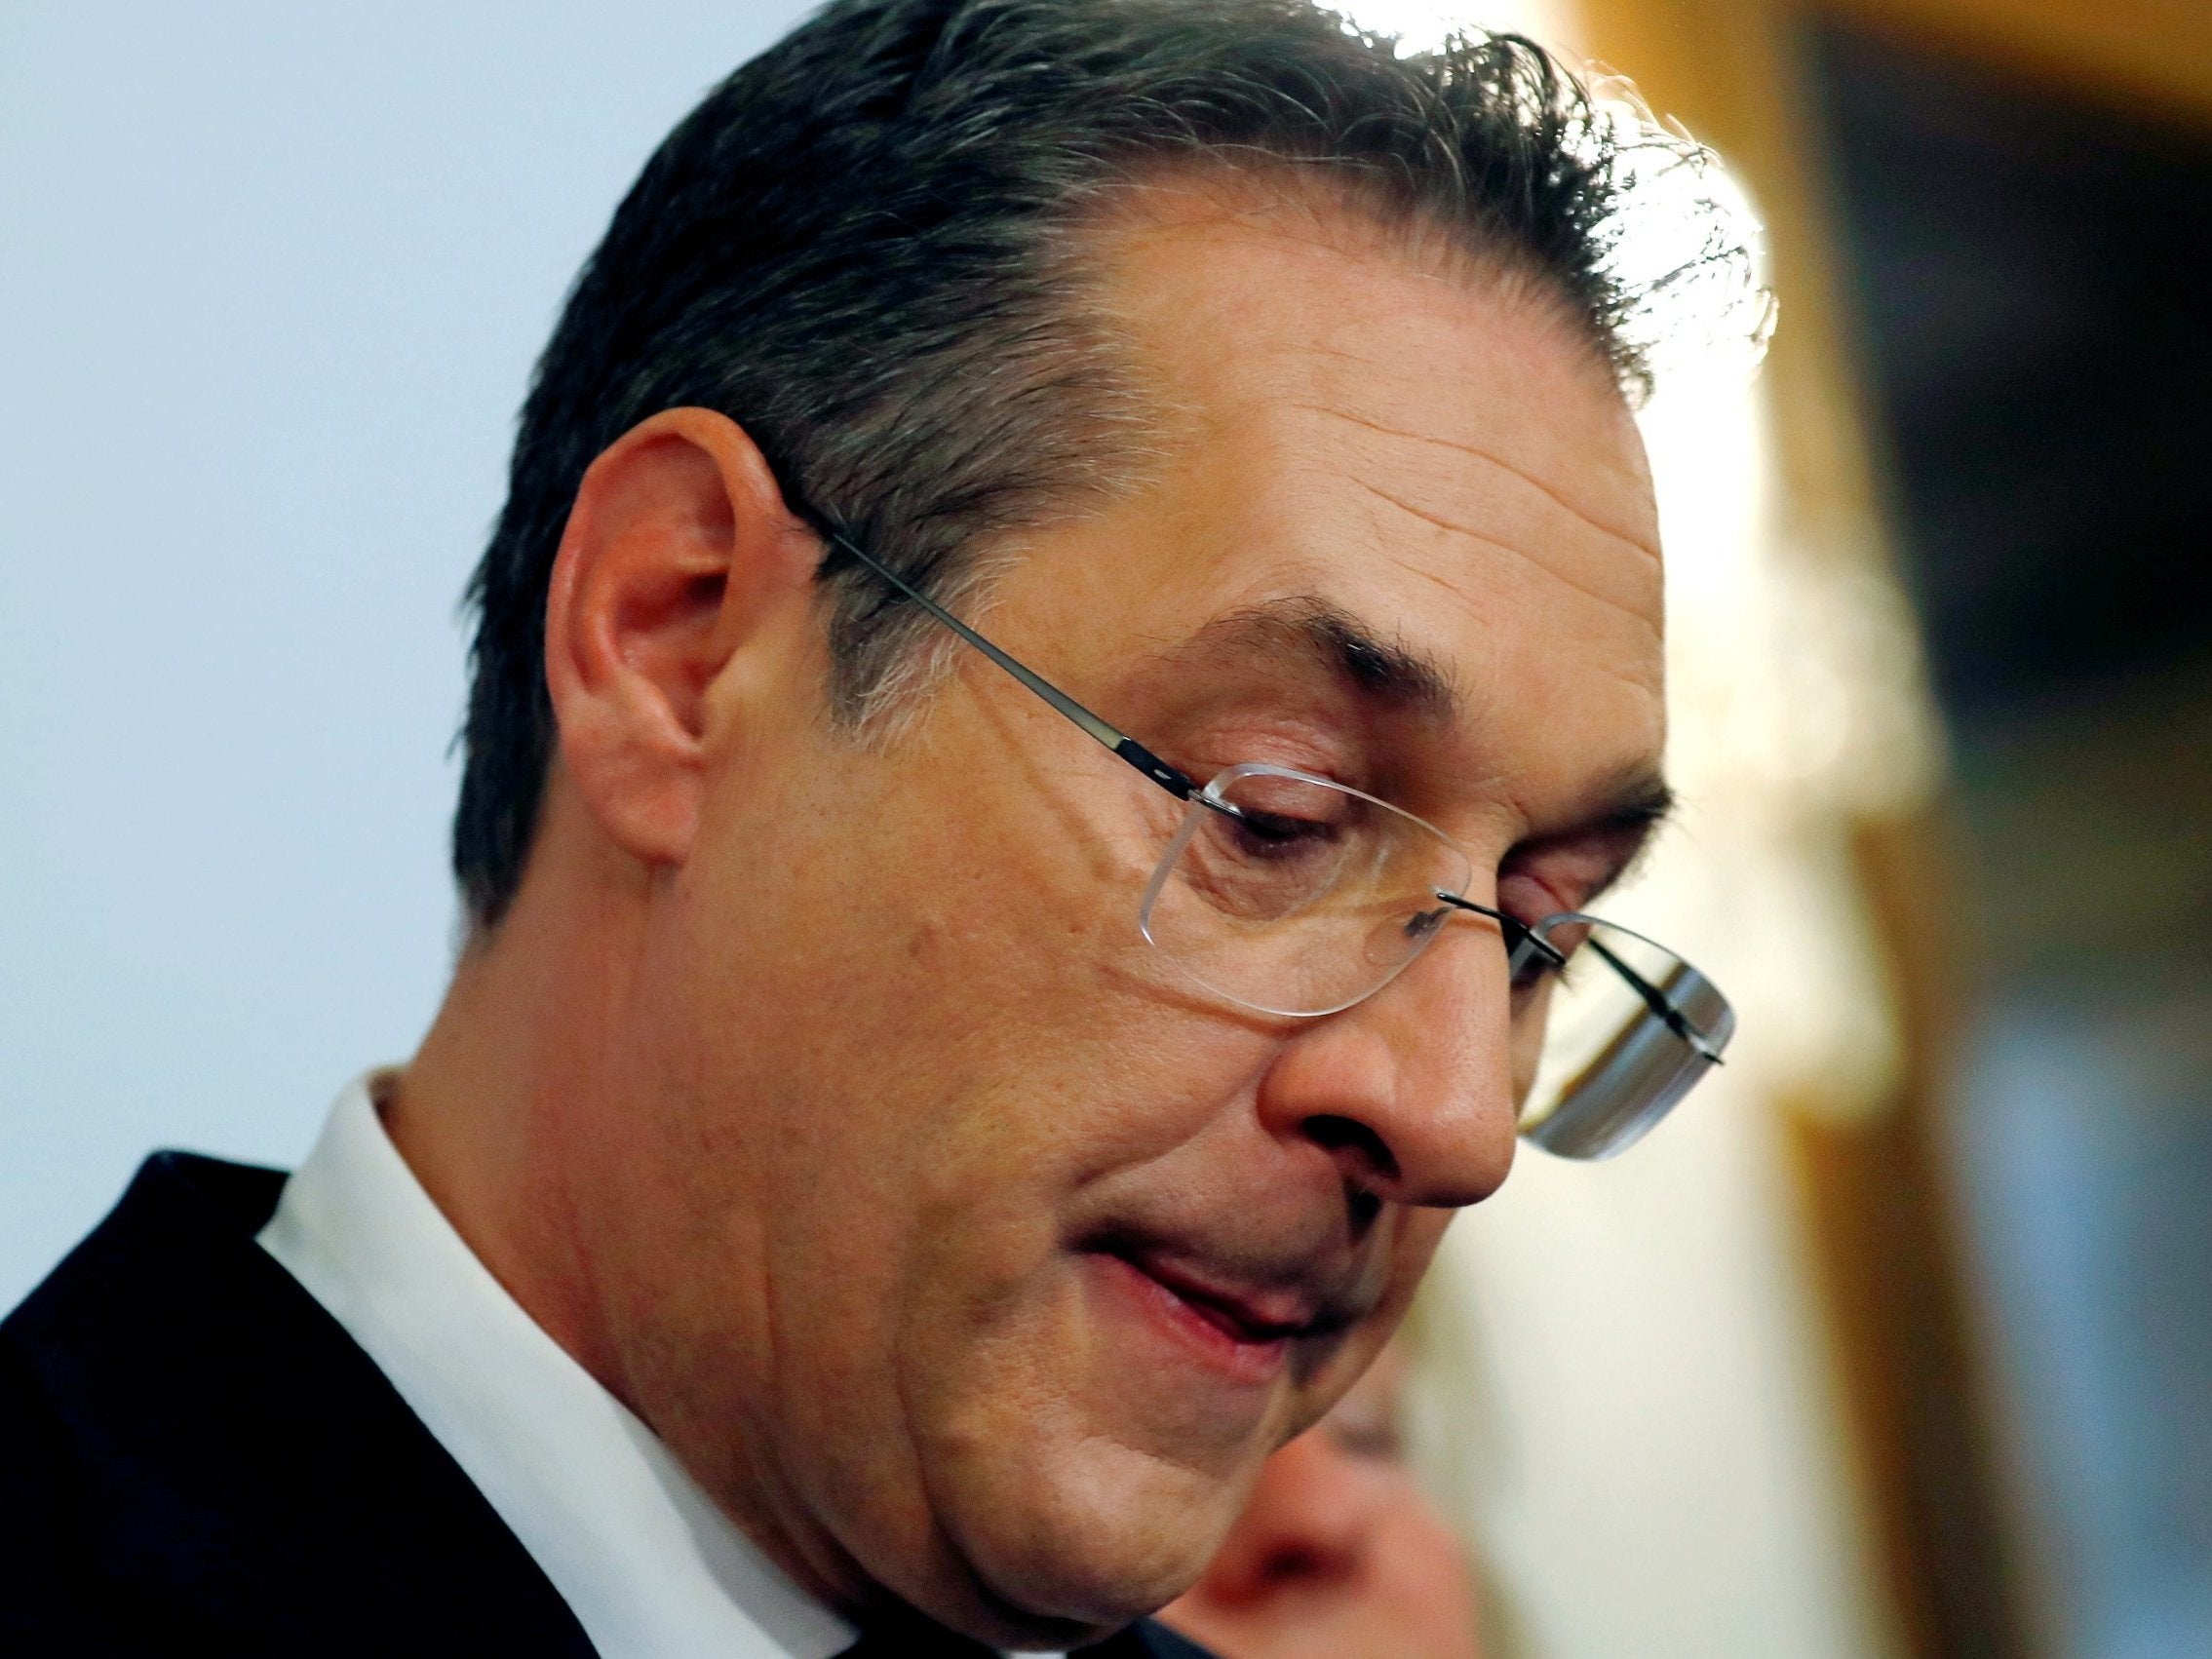 Austrian vice chancellor Heinz-Christian Strache reacts as he addresses the media in Vienna